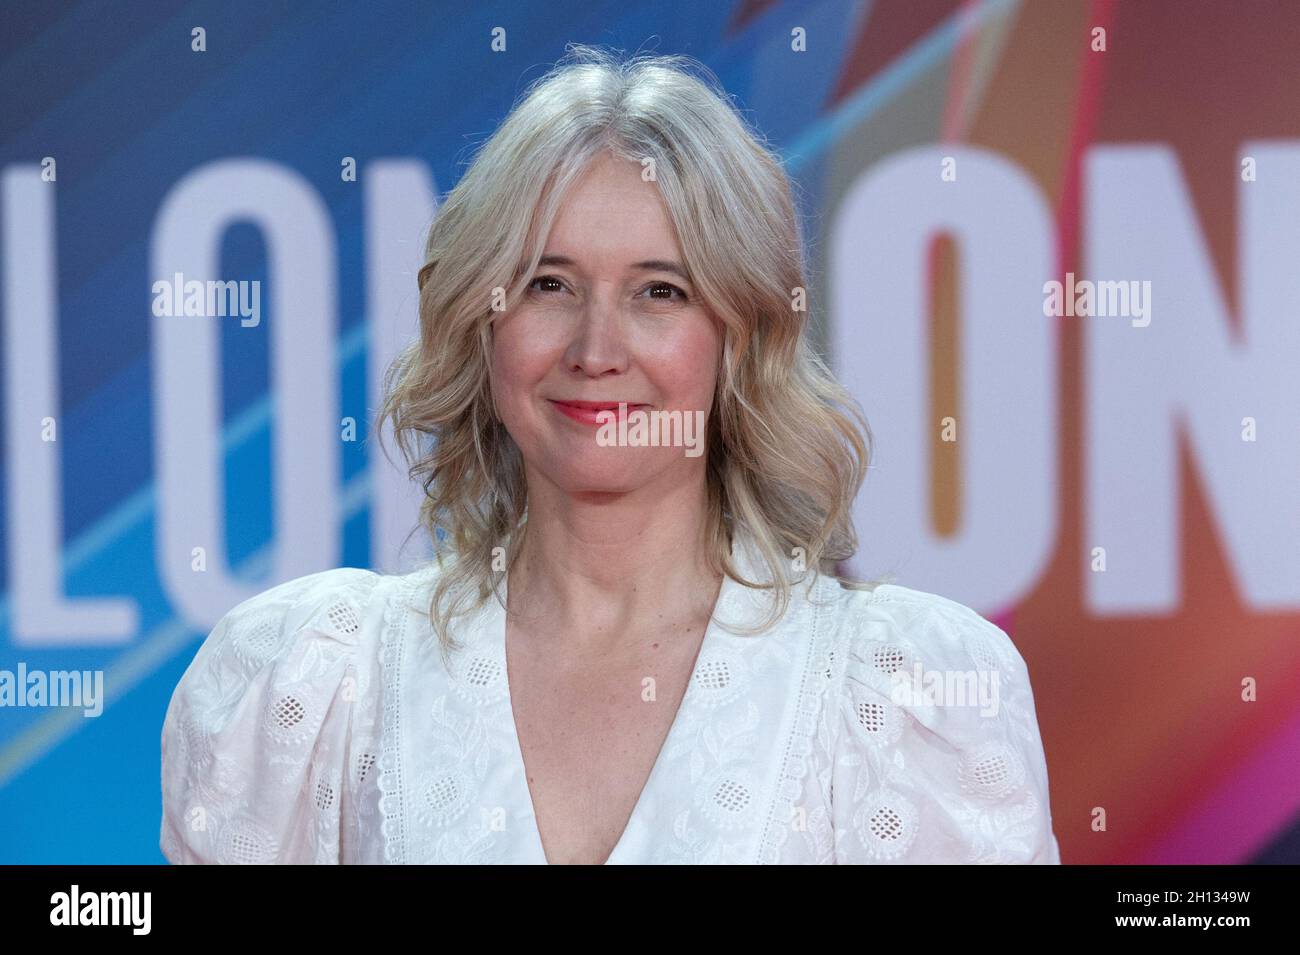 London, UK. 15th Oct, 2021. Justine Simons attending the Succession Premiere as part of the 65th BFI London Film Festival at the Royal Festival Hall in London, England on October 15, 2021. Photo by Aurore Marechal/ABACAPRESS.COM Credit: Abaca Press/Alamy Live News Stock Photo